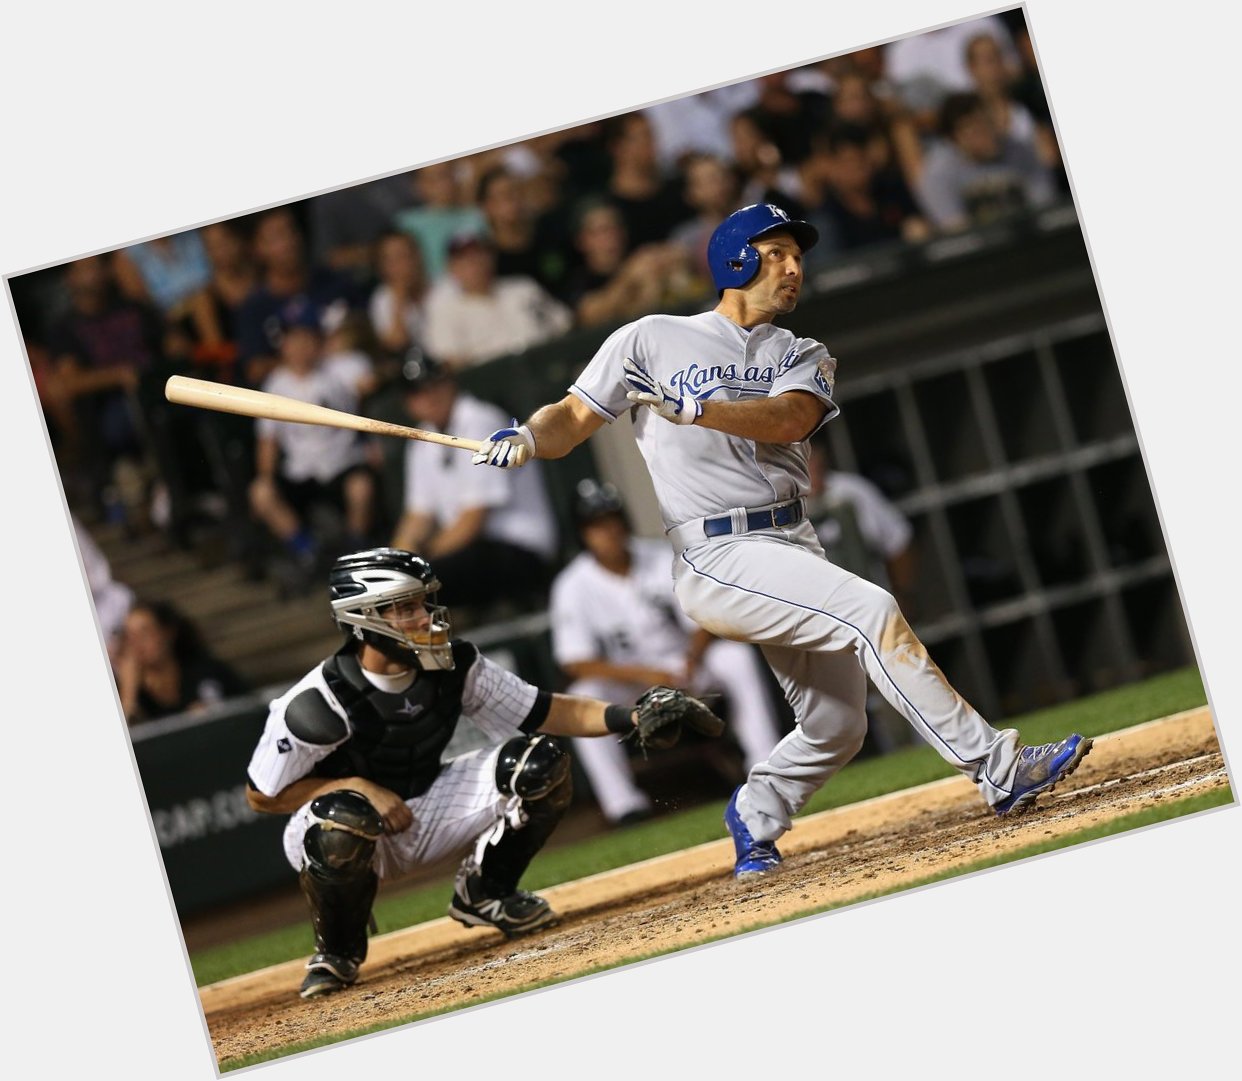 Happy Birthday to former Kansas City Royals player Raul Ibanez(2001-2003, 2014) who turns 46 today! 